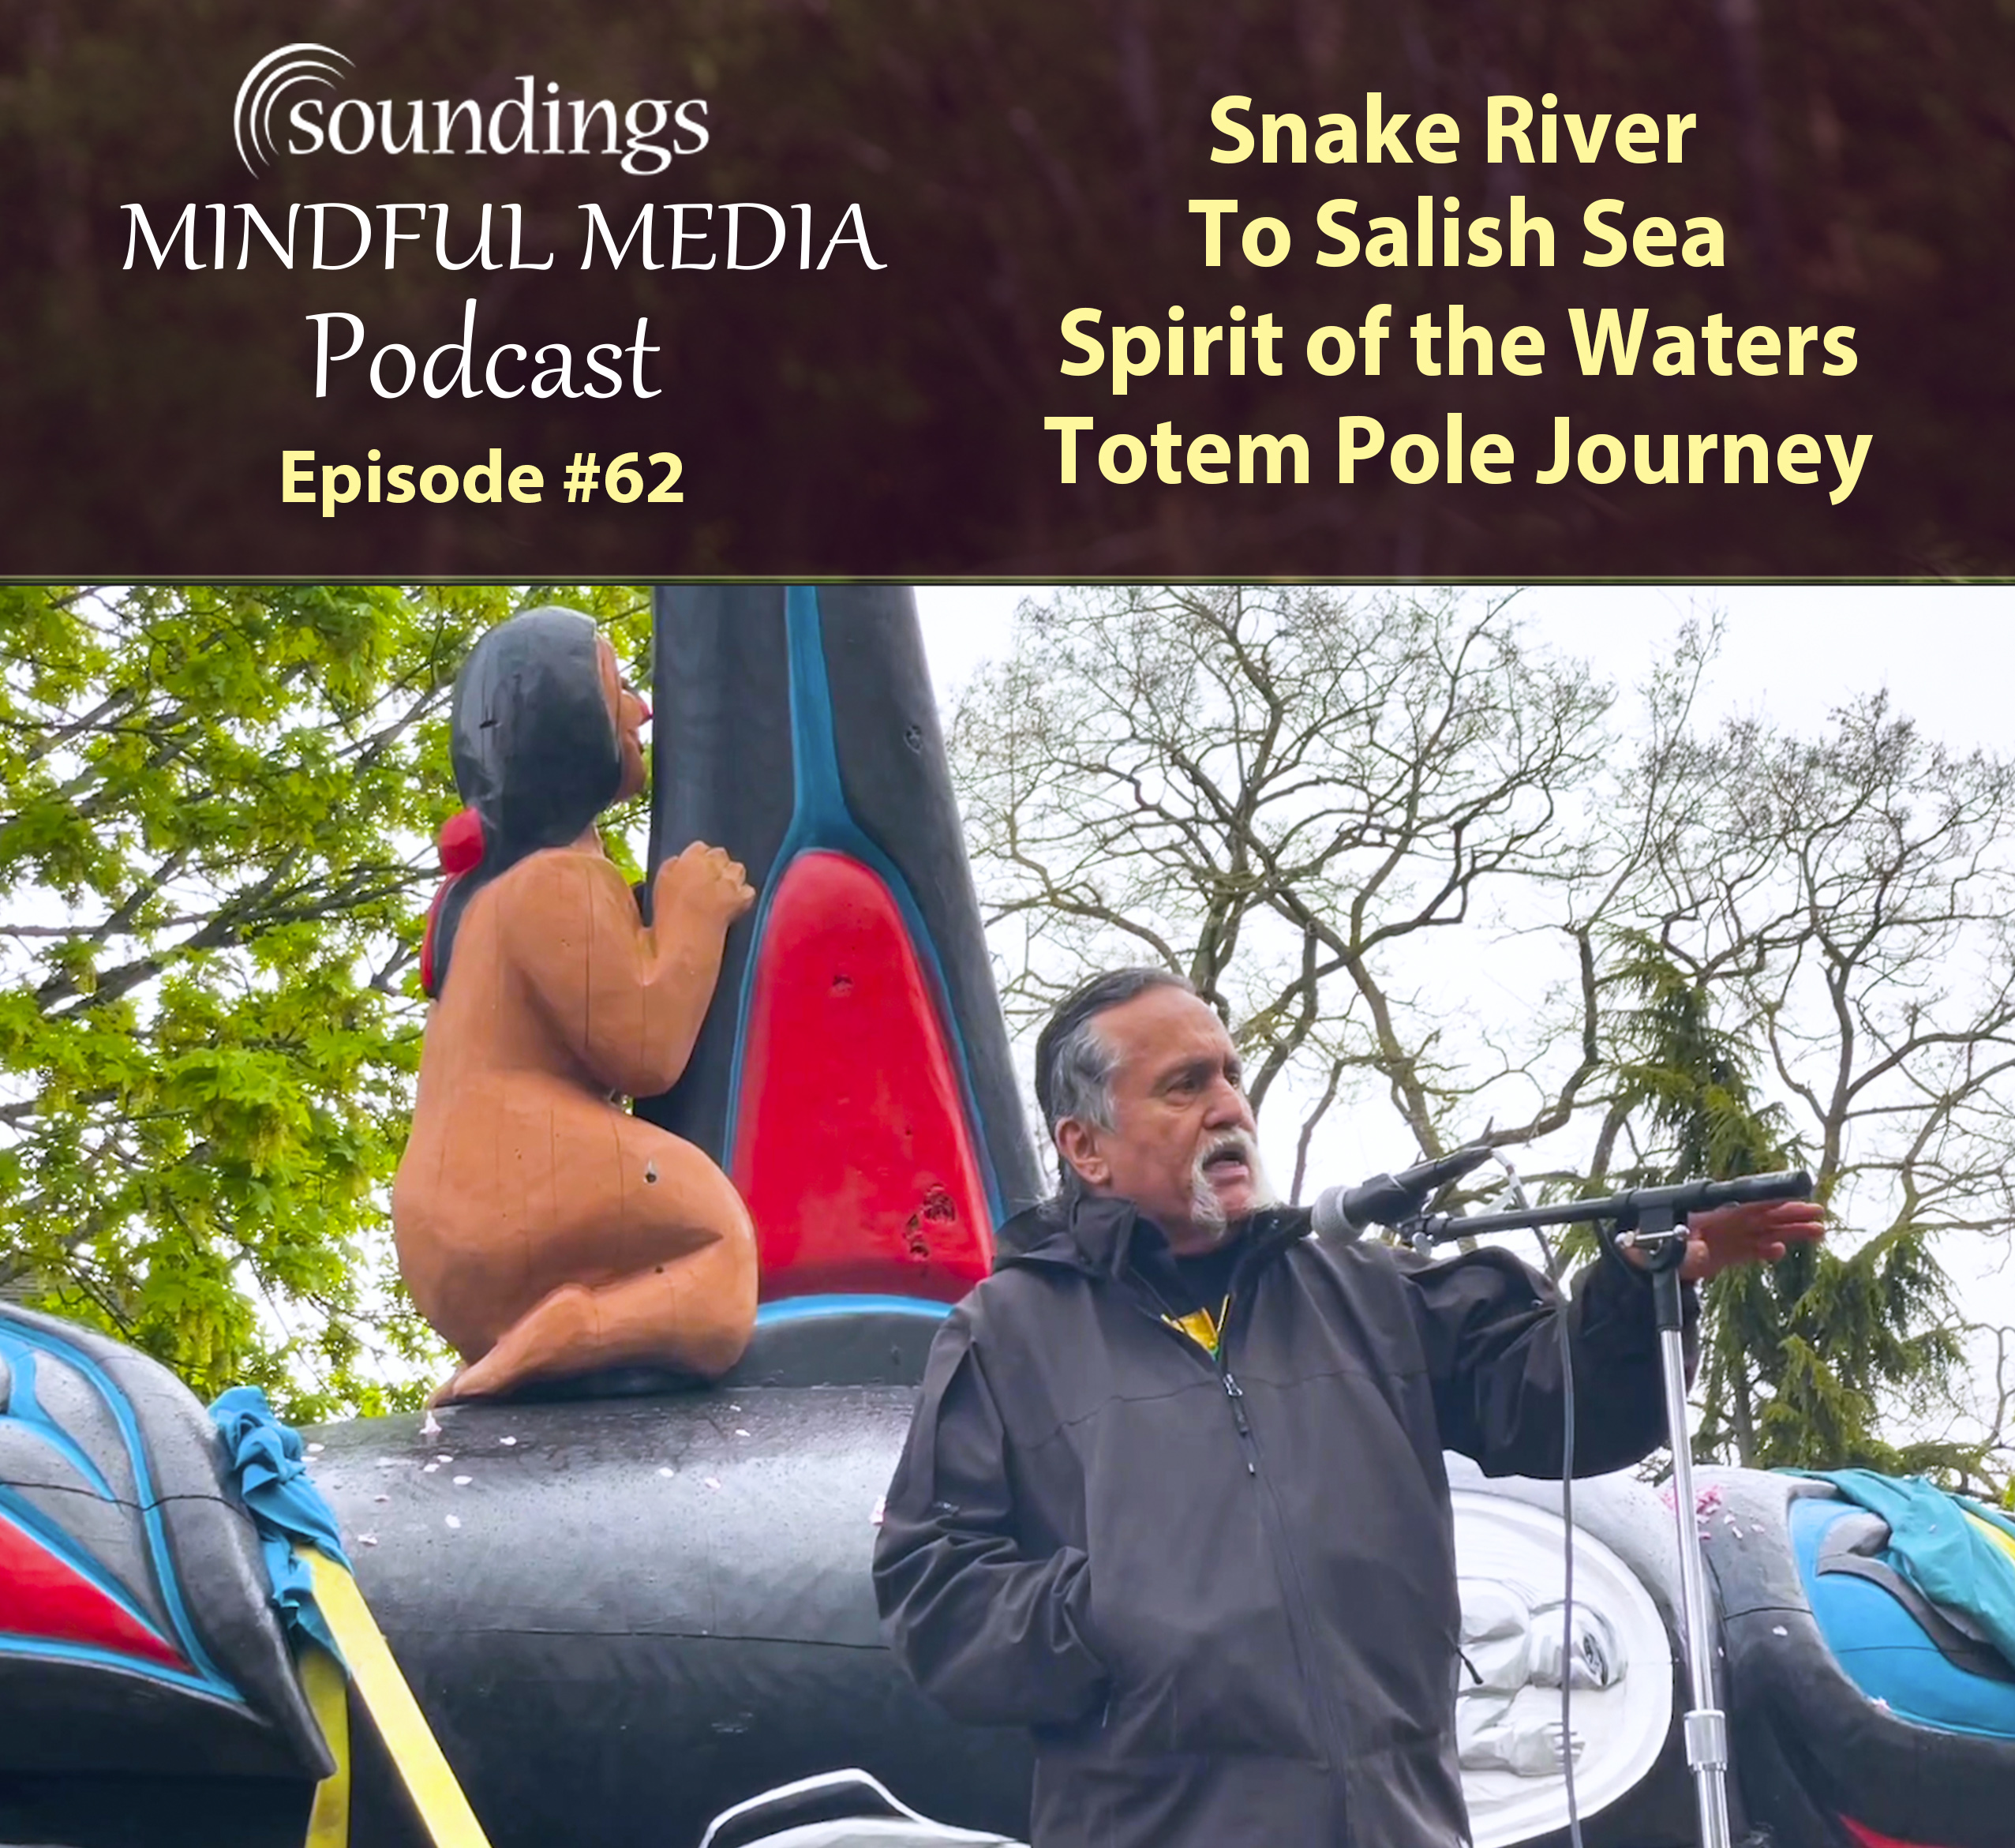 Snake River to Salish Sea Spirit of the Waters Totem Pole Journey on Soundings Mindful Media Podcast